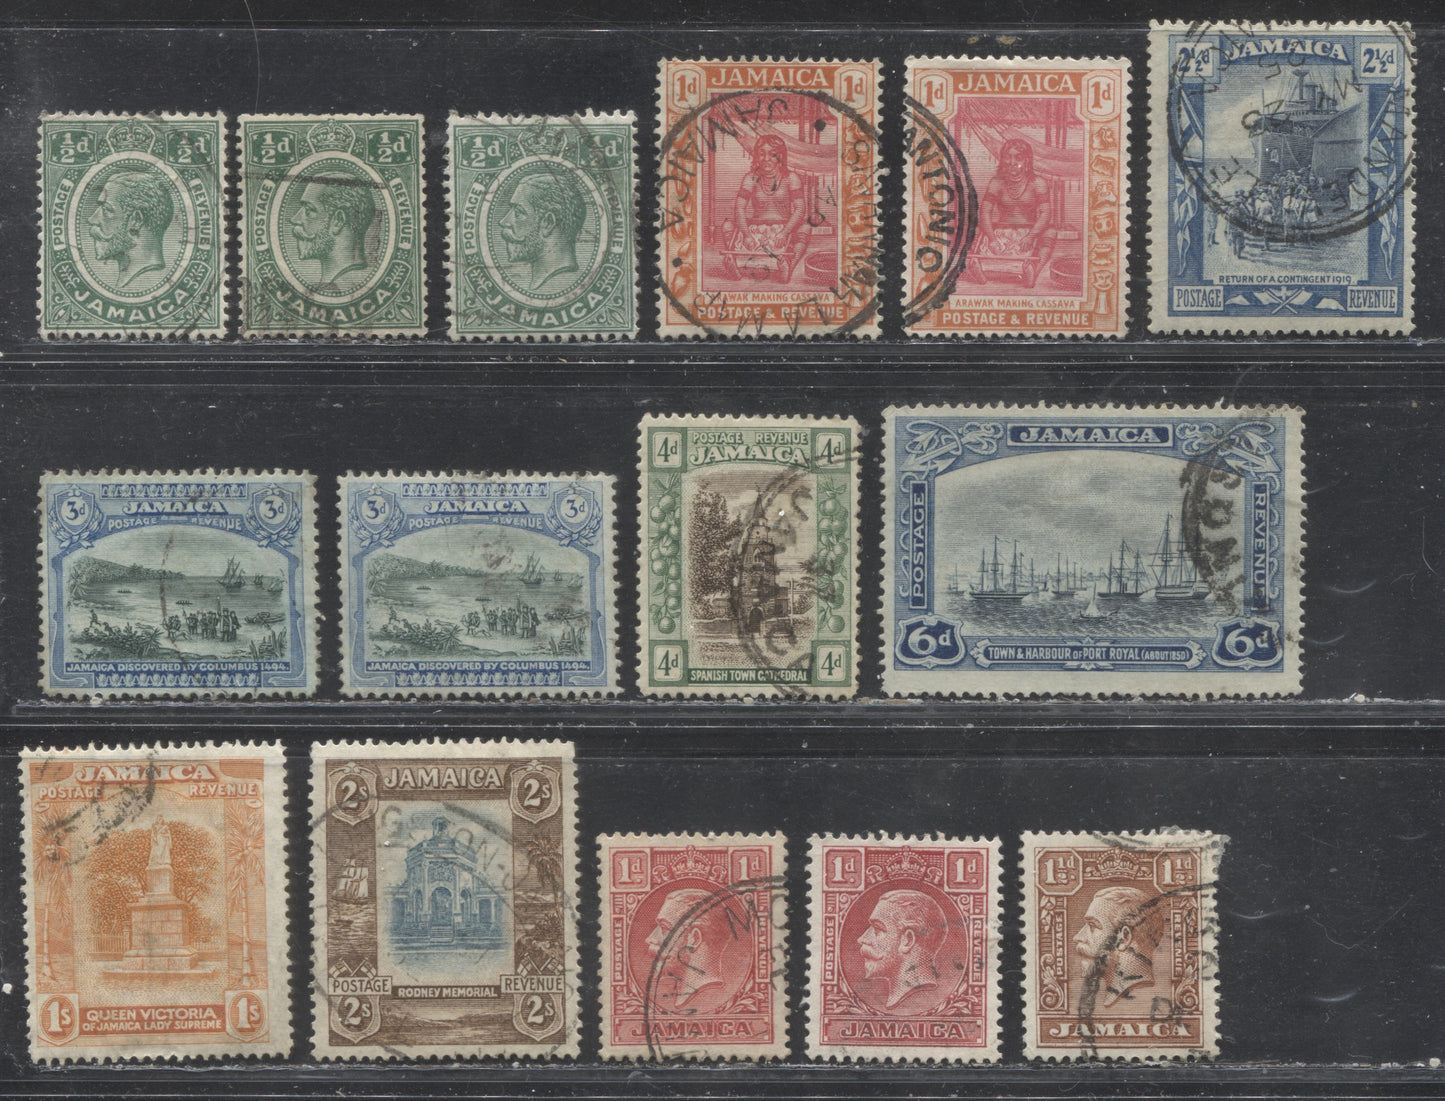 Lot 135 Jamaica SG#92/110 1/2d 2/- Green - Chocolate & Grey Blue Various Designs, 1921-1932 Keyplate and Engraved Definitive Issues, 15 Fine and VF Used Singles, Script CA Watermark, Dies 1 & 2, Including Listed & Unlisted Shades